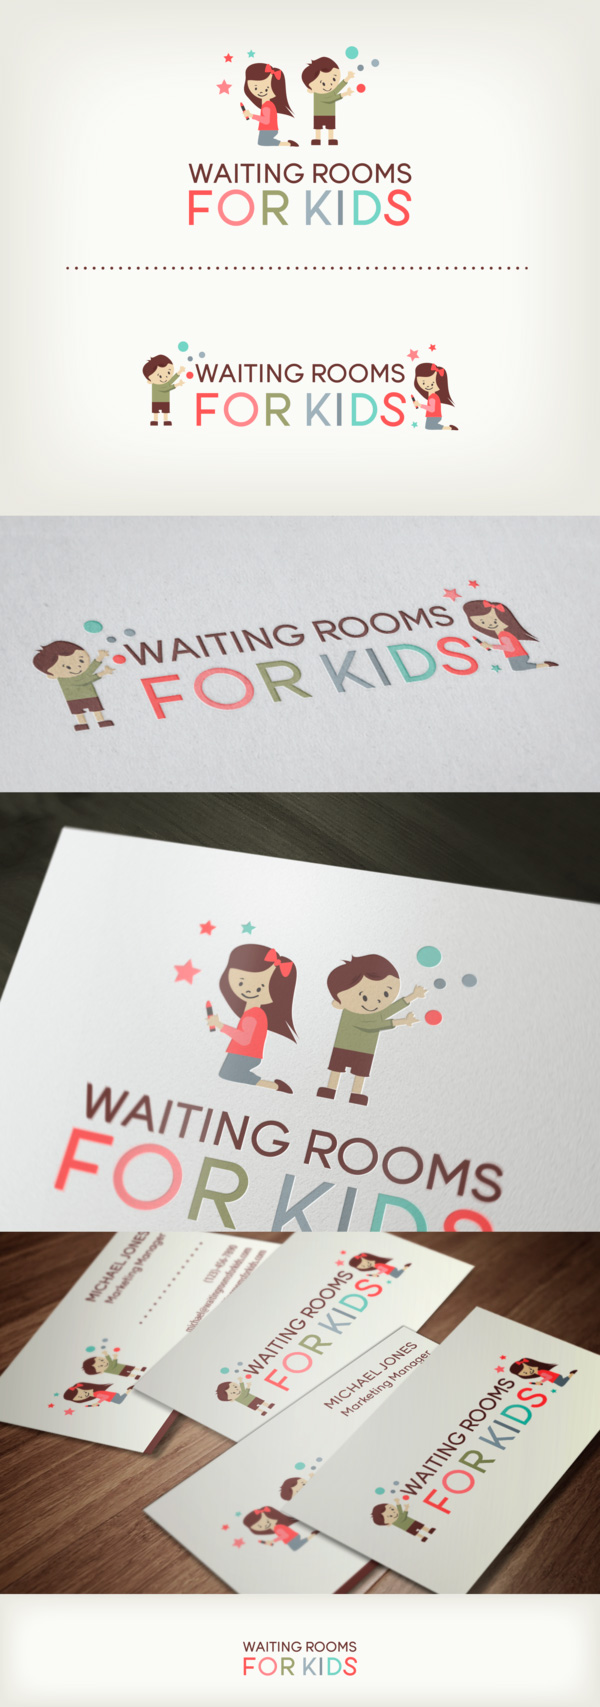 waiting rooms for kids by Michelle Bastarache